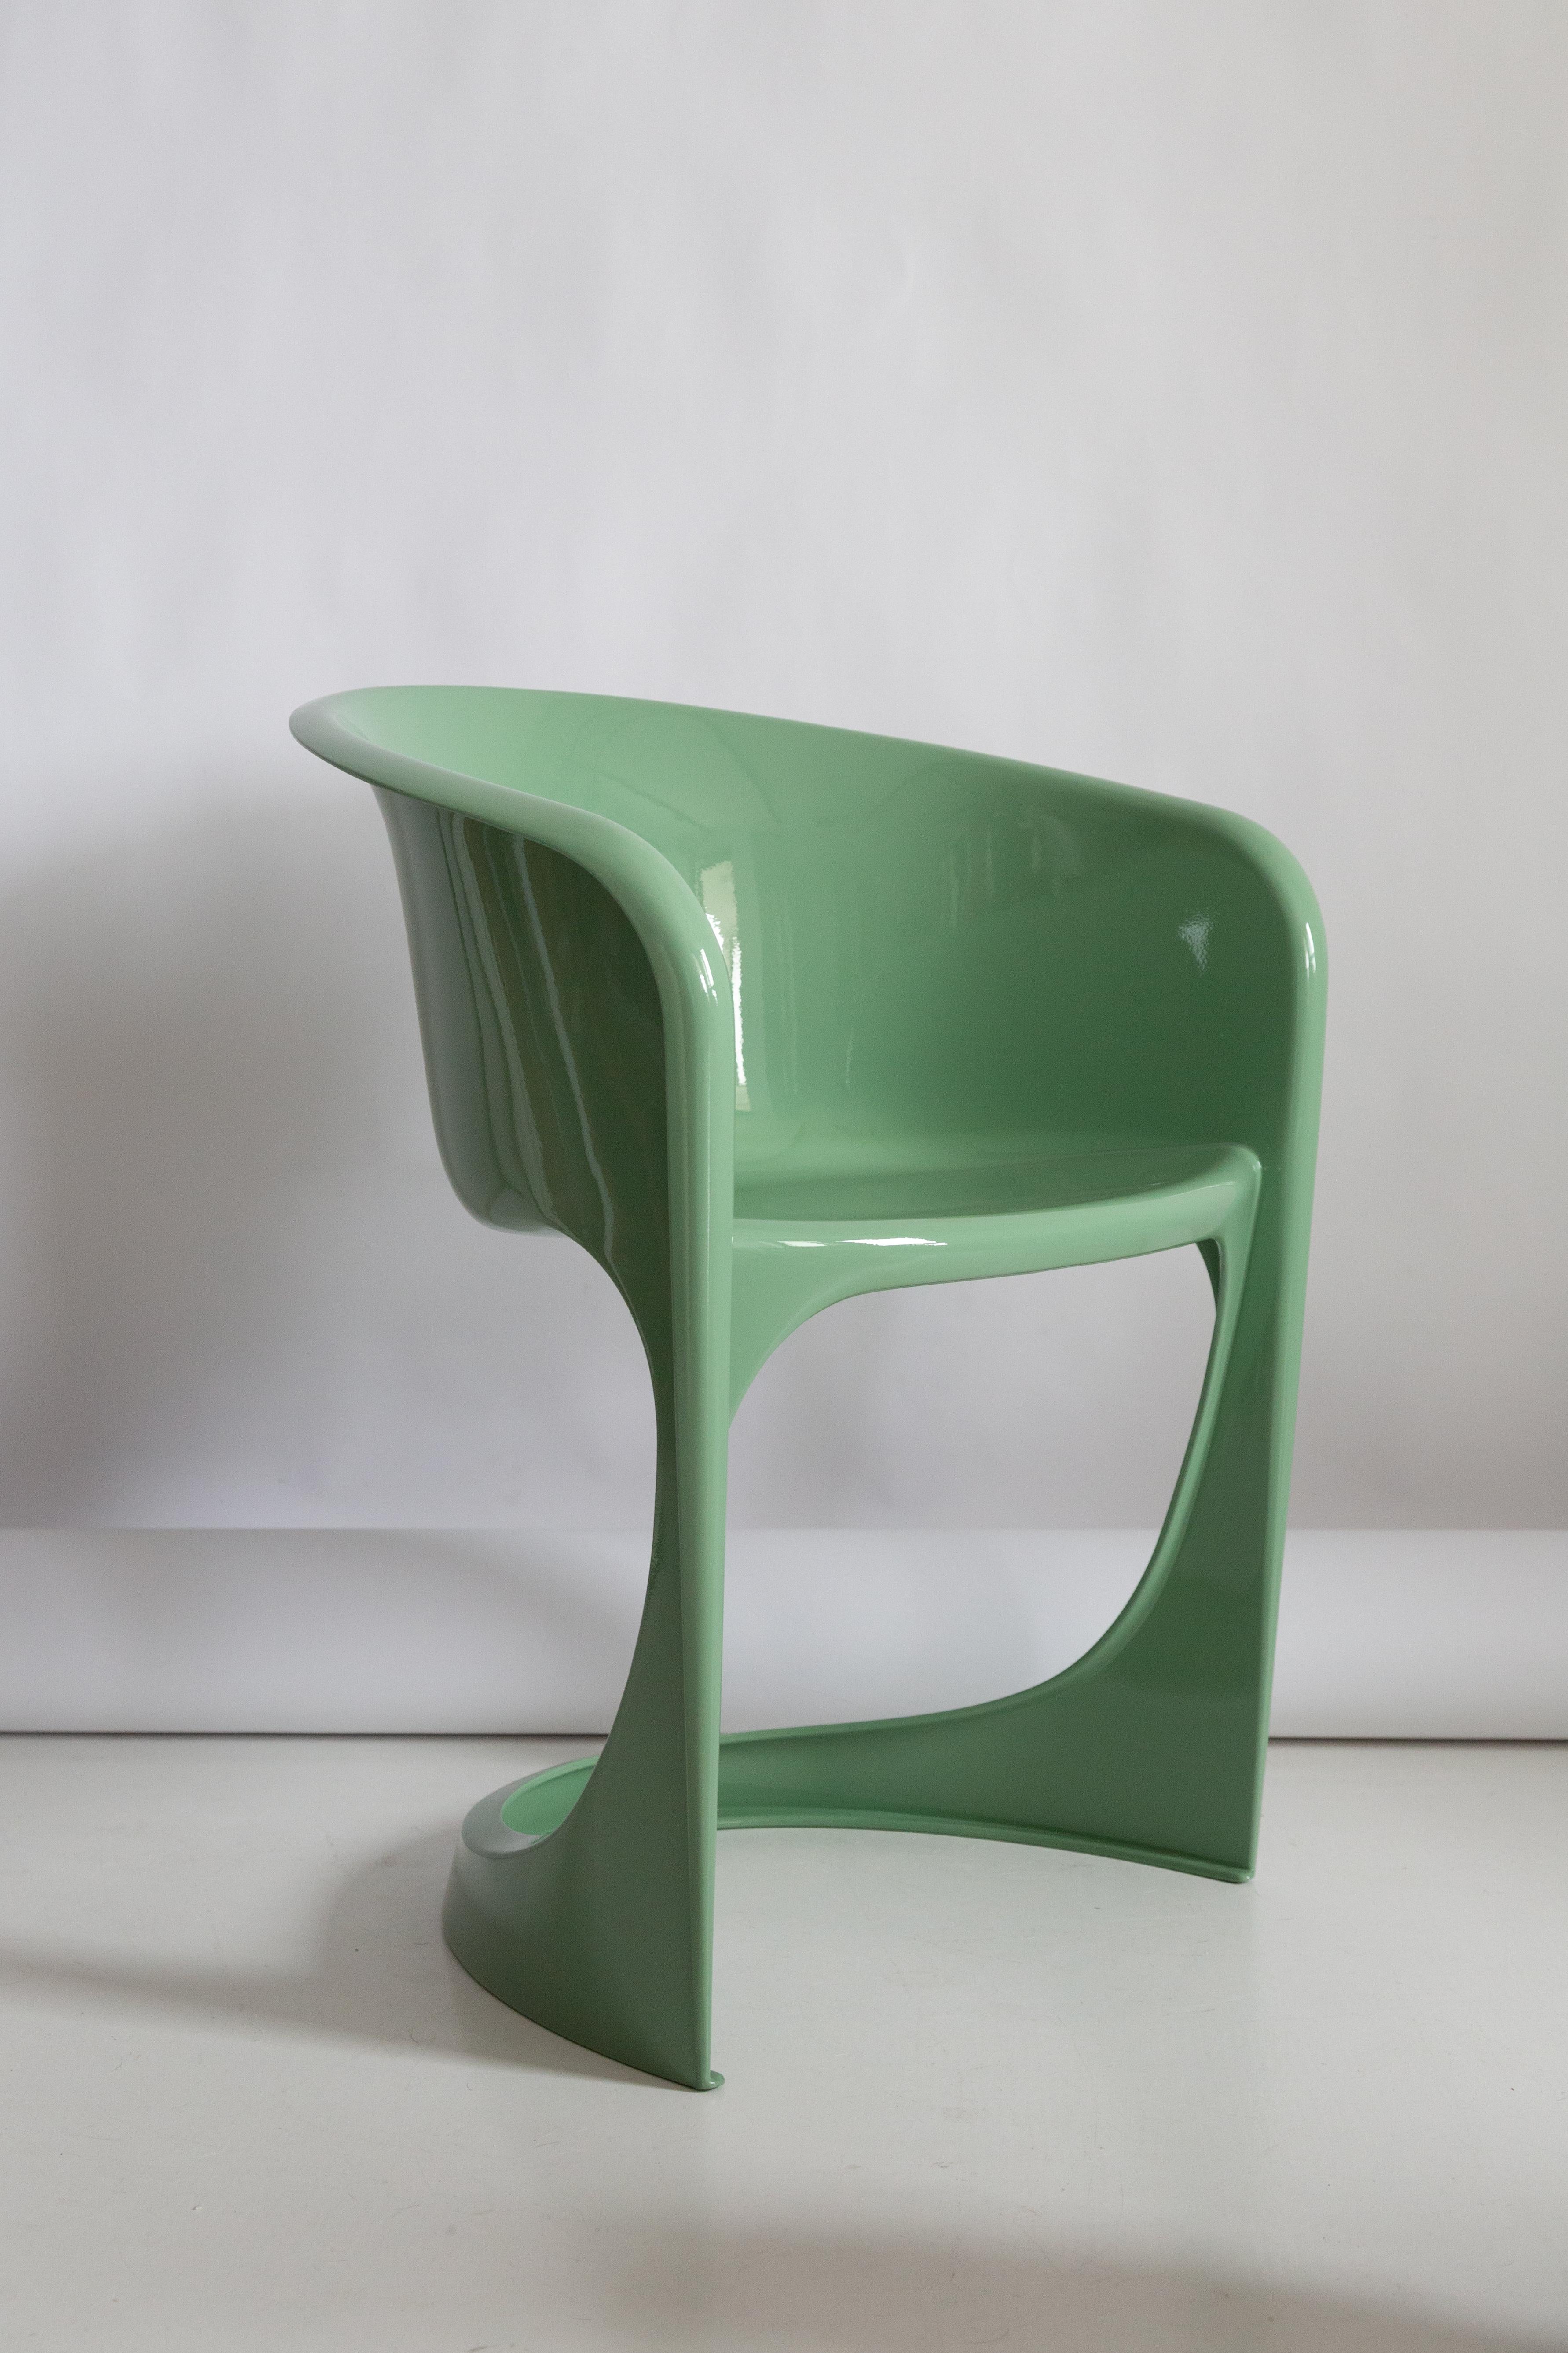 Polish production chairs from Plastics Factory 'Krywald' in Knurow have embossed signatures. They come from the 1970s. The author of this project is the Danish architect Steen Østergaard, who in 1974 designed this pattern for Cado manufacture.

The